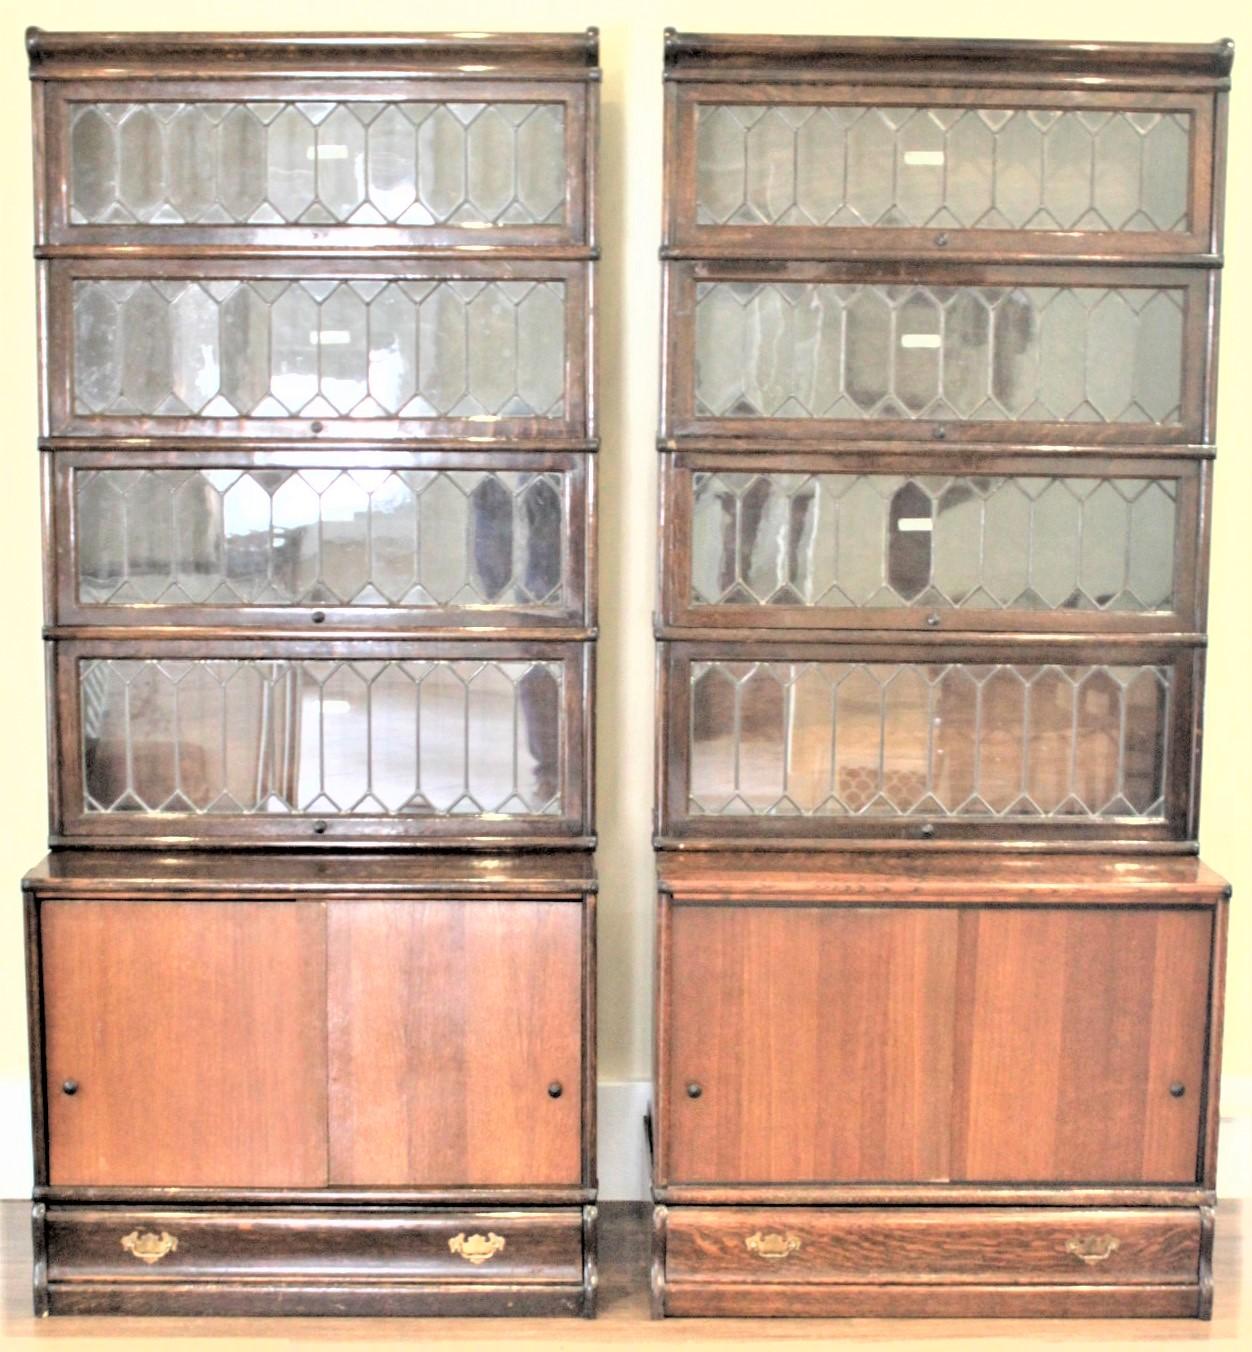 This pair of large stacking oak barrister's bookcases were made by the Globe-Wernicke Company of England in approximately 1920. These bookcases each have a set of four stacking bookcases with hand-crafted leaded glass door which lift up and slide